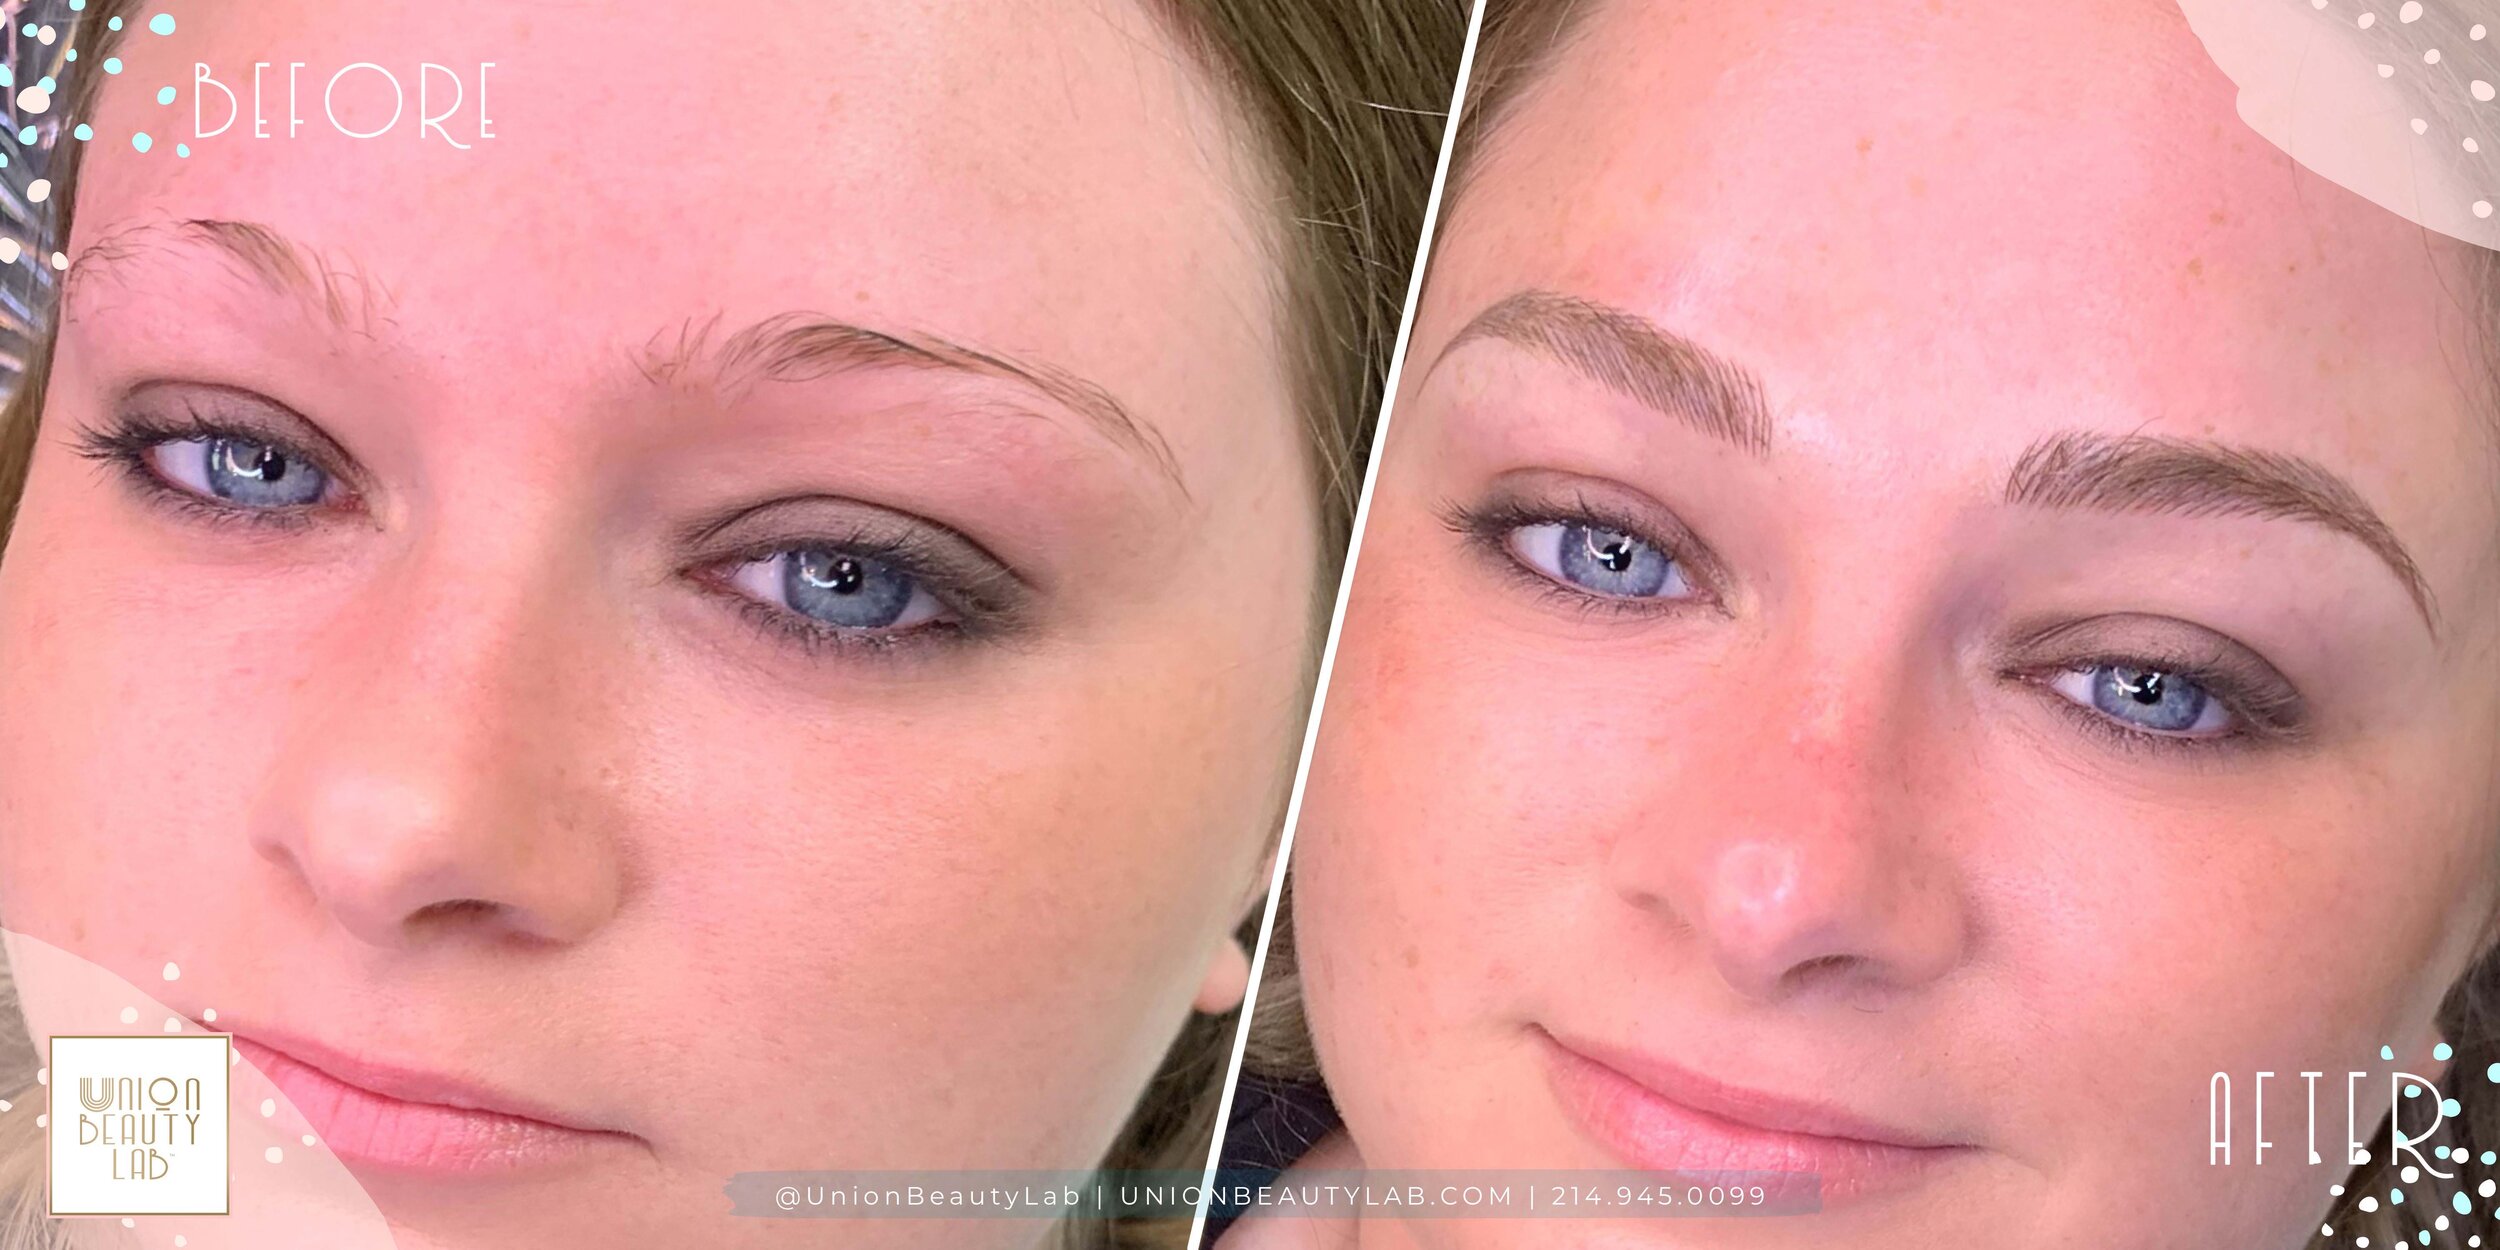 2149450099 Union Beauty Lab Microblading Artists Dallas Blonde Brows 48.jpg